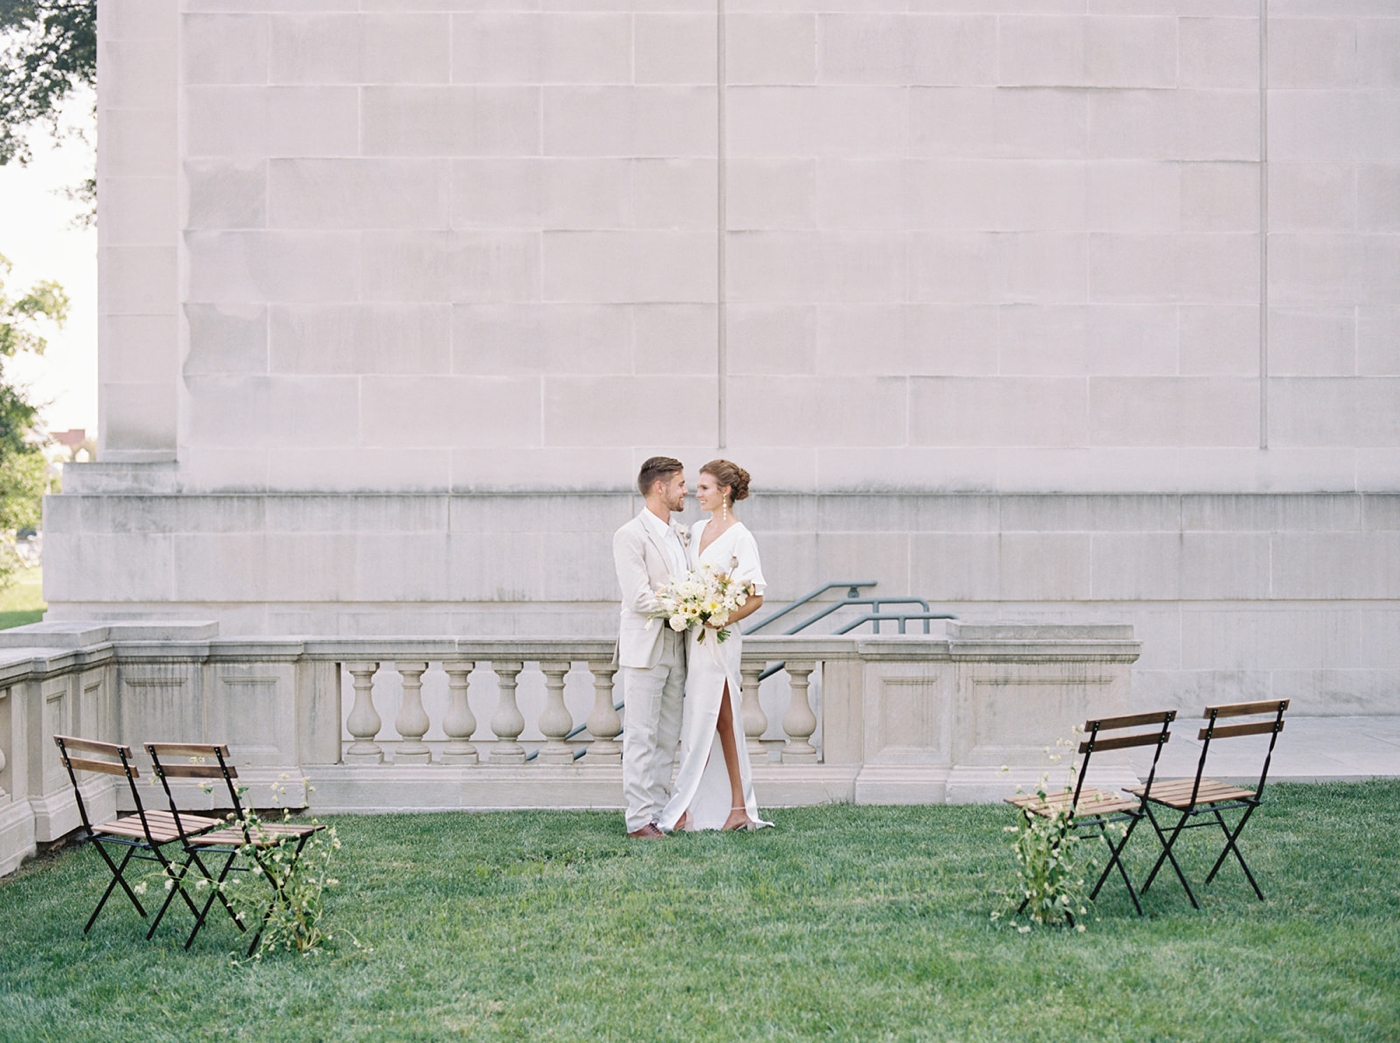 Elopement ceremony at The Virginia Museum of History and Culture in Richmond